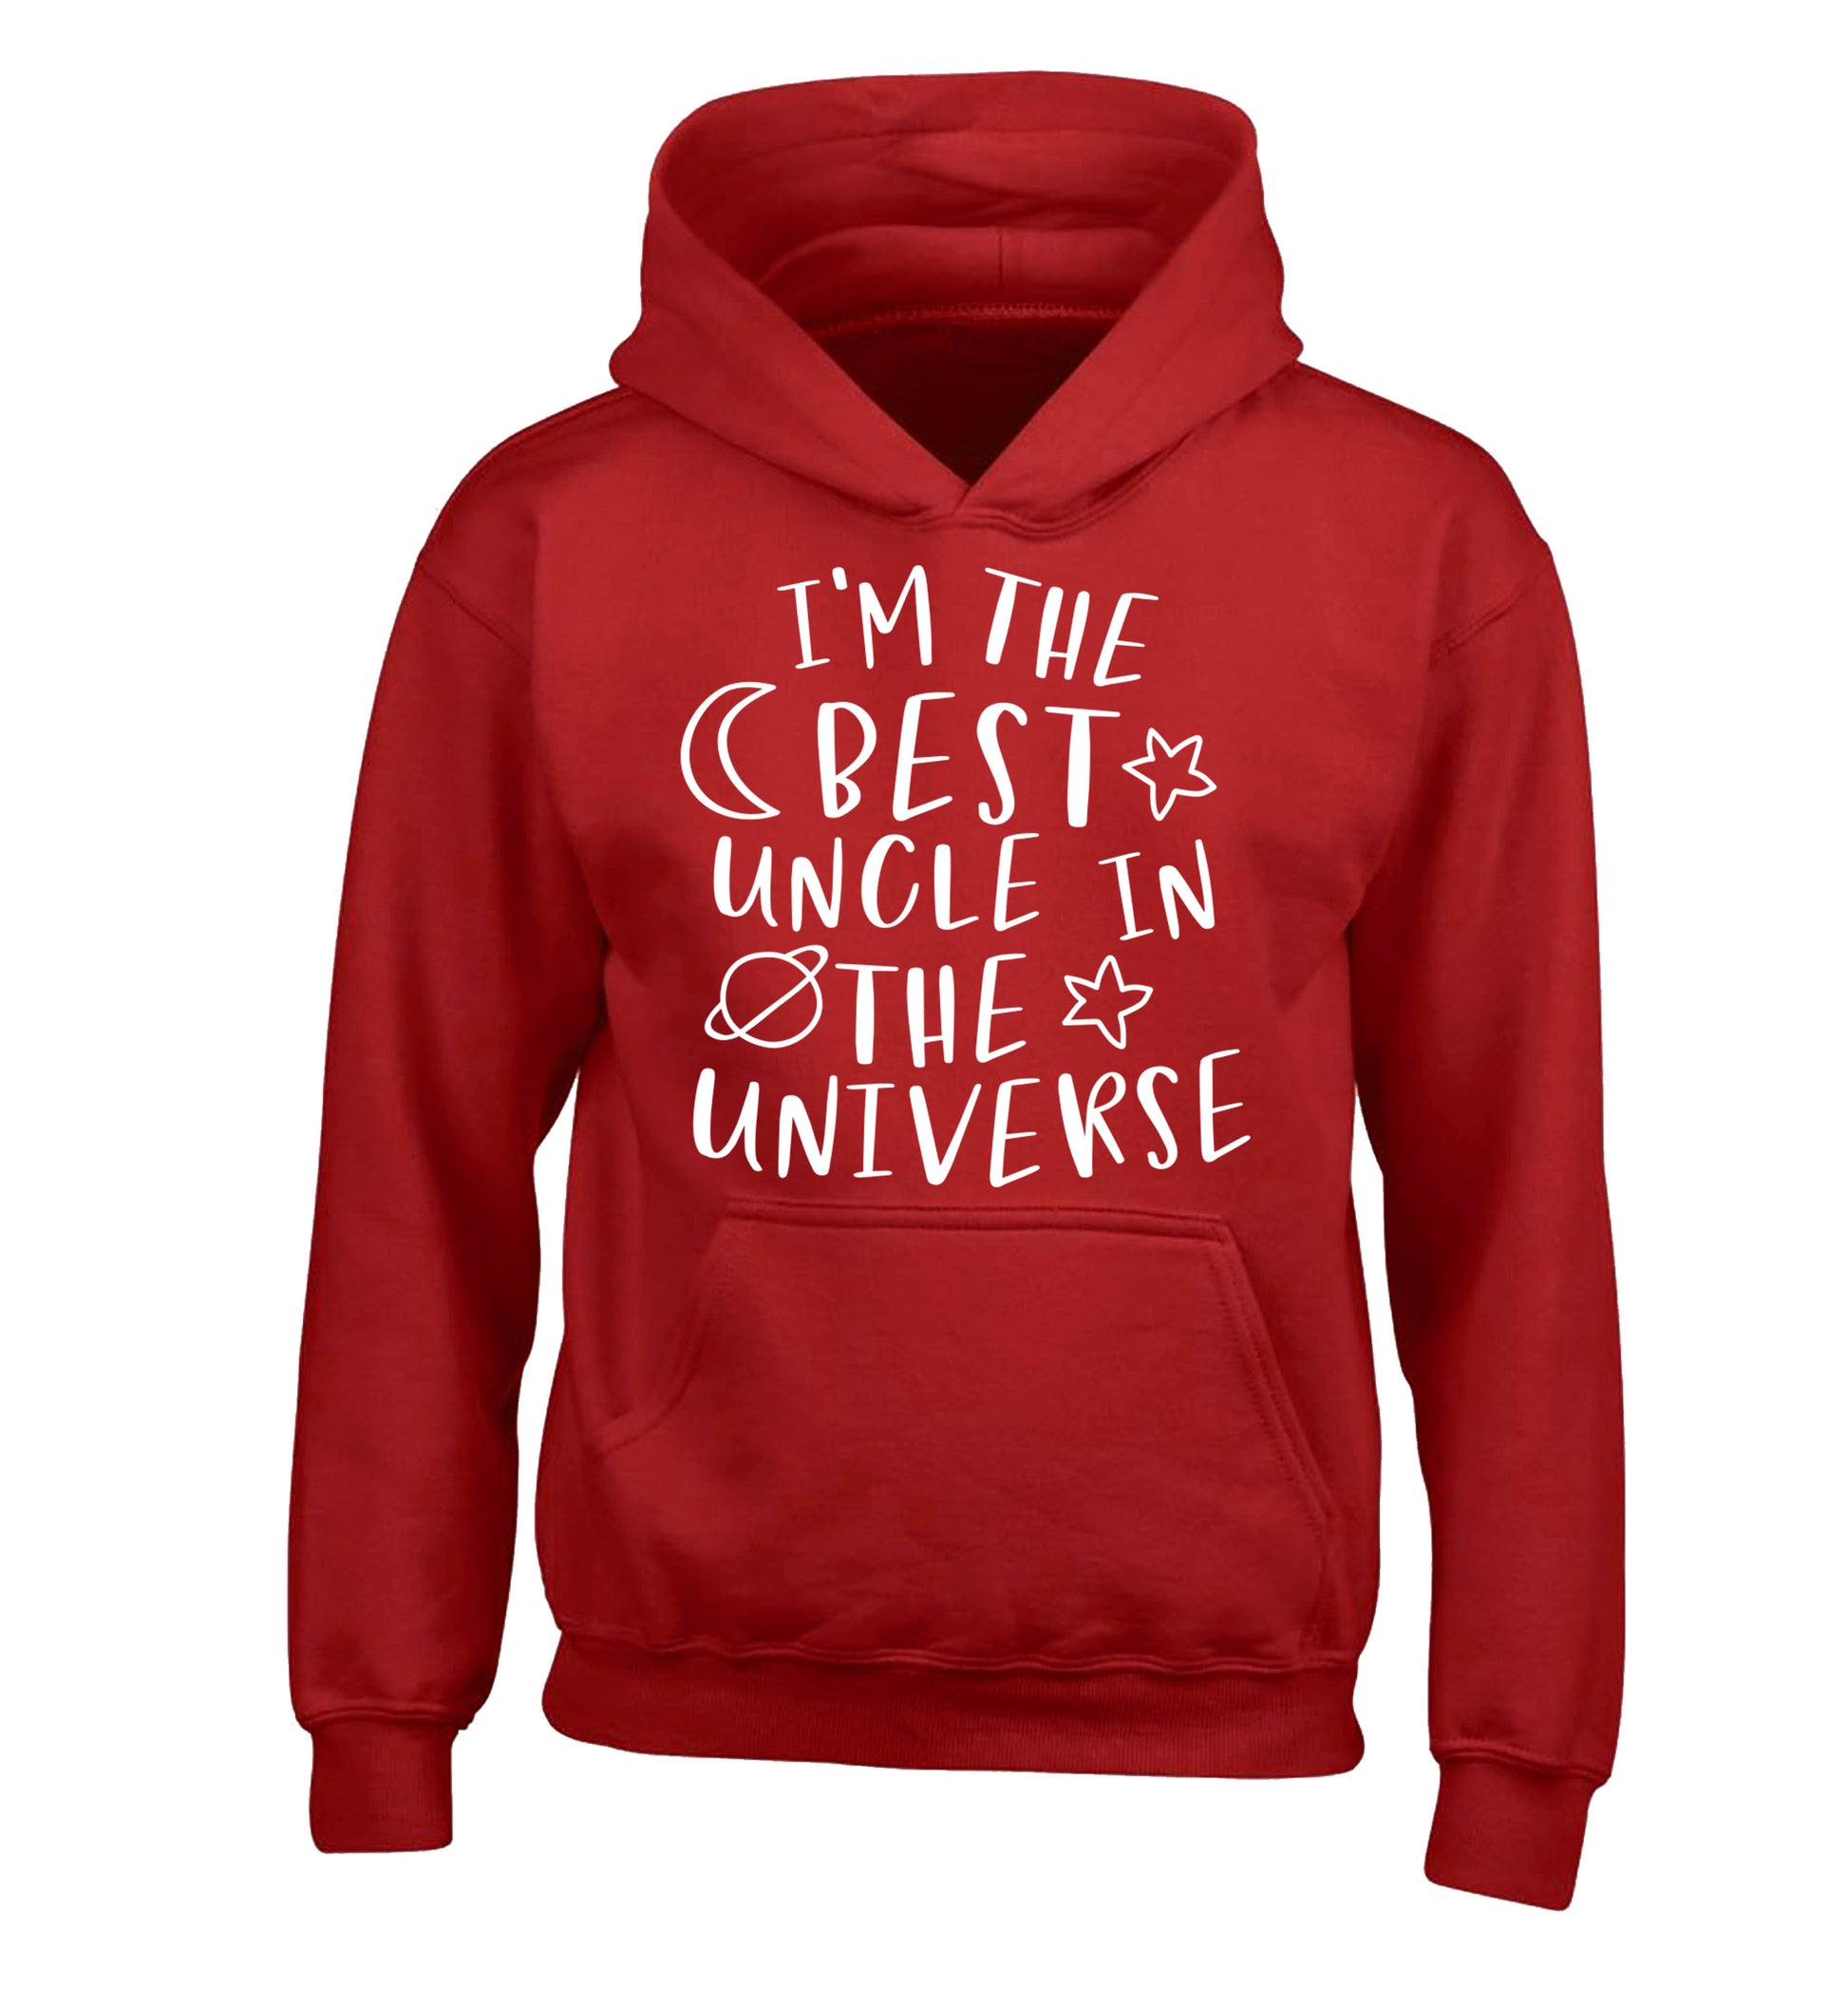 I'm the best uncle in the universe children's red hoodie 12-13 Years